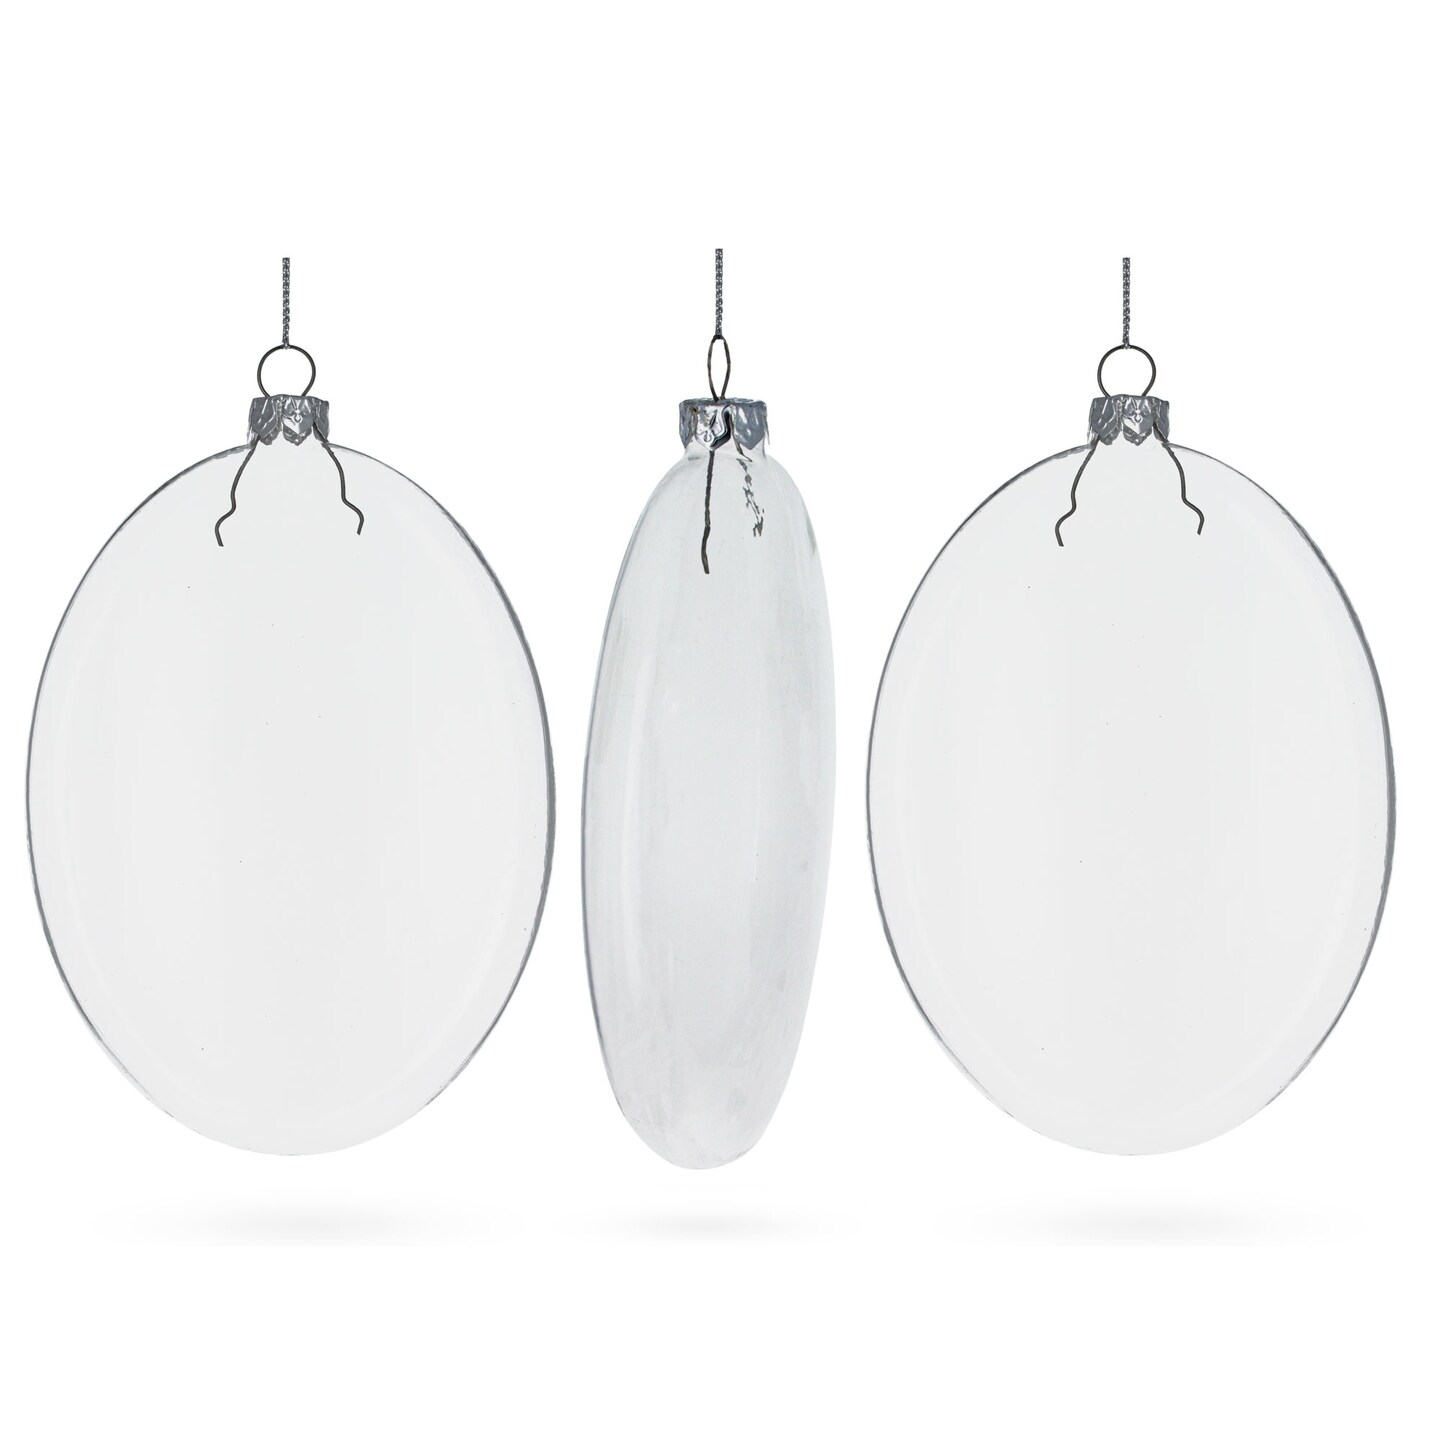 Elegant Set of 3 Oval Flat Discs Clear - Blown Glass Christmas Ornament, 5 Inches (127 mm)